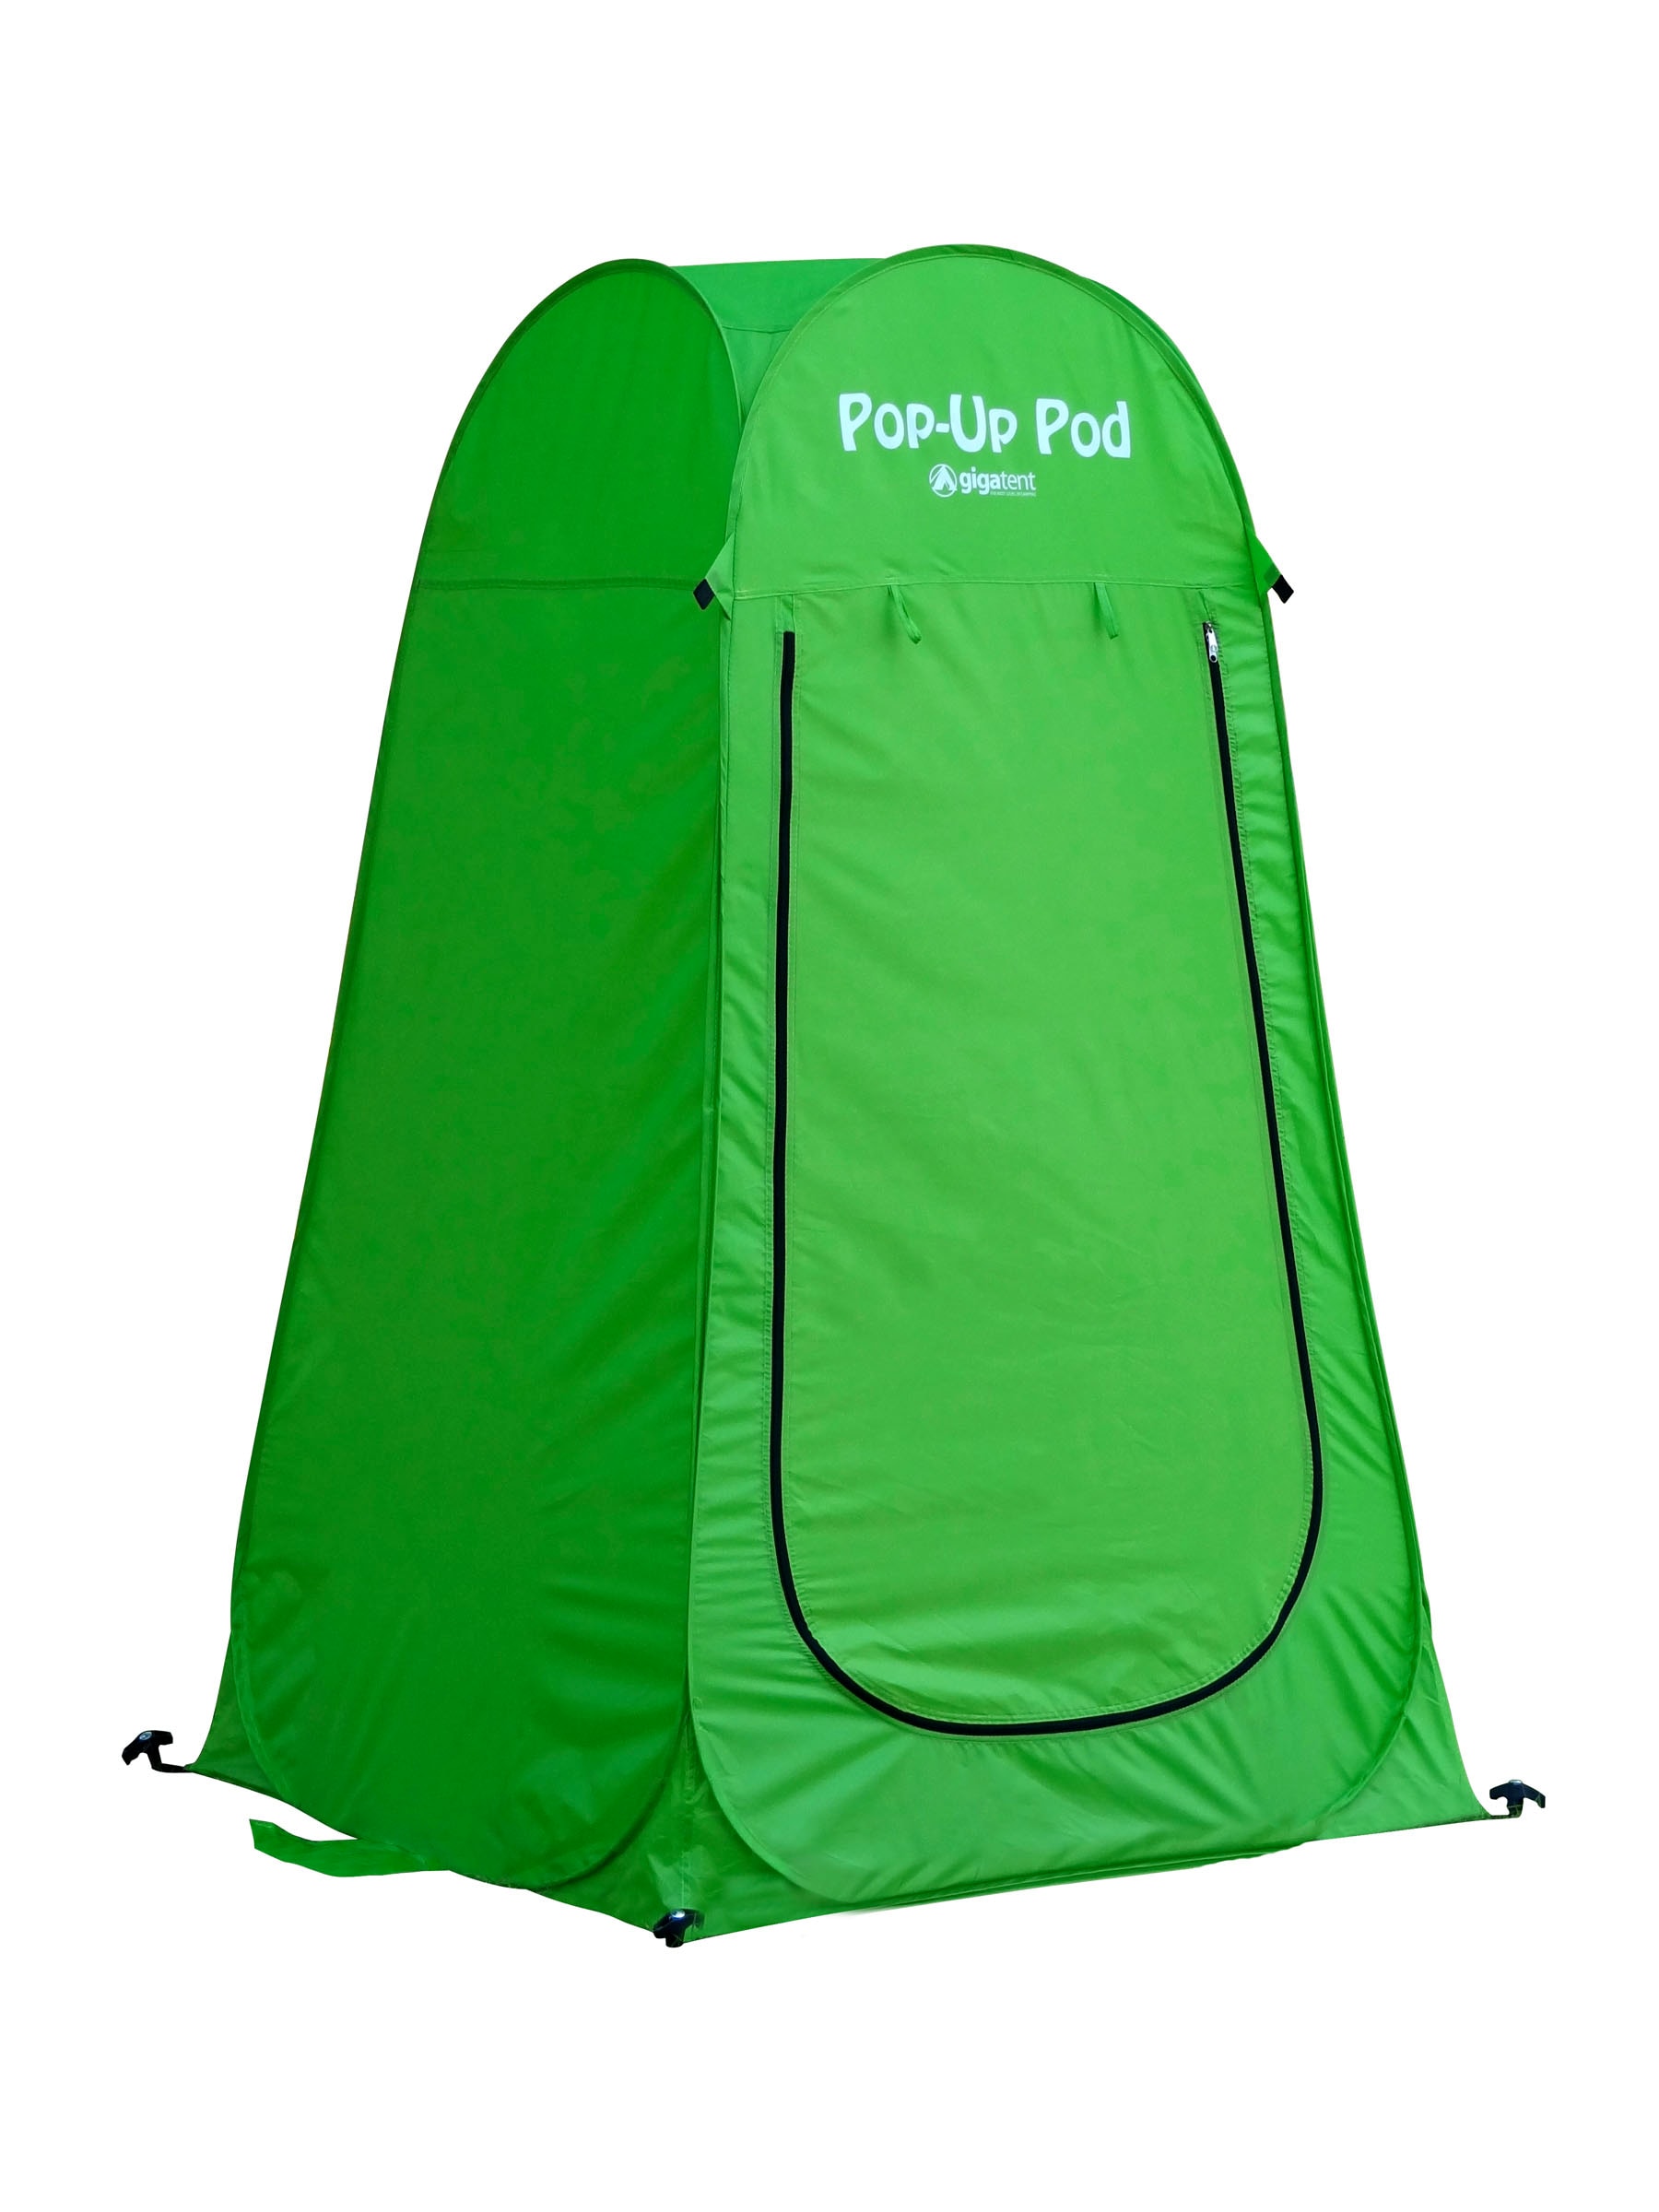 Portable Instant Pop Up Tent Camping Shower With Folding Toilet Portable  Chair